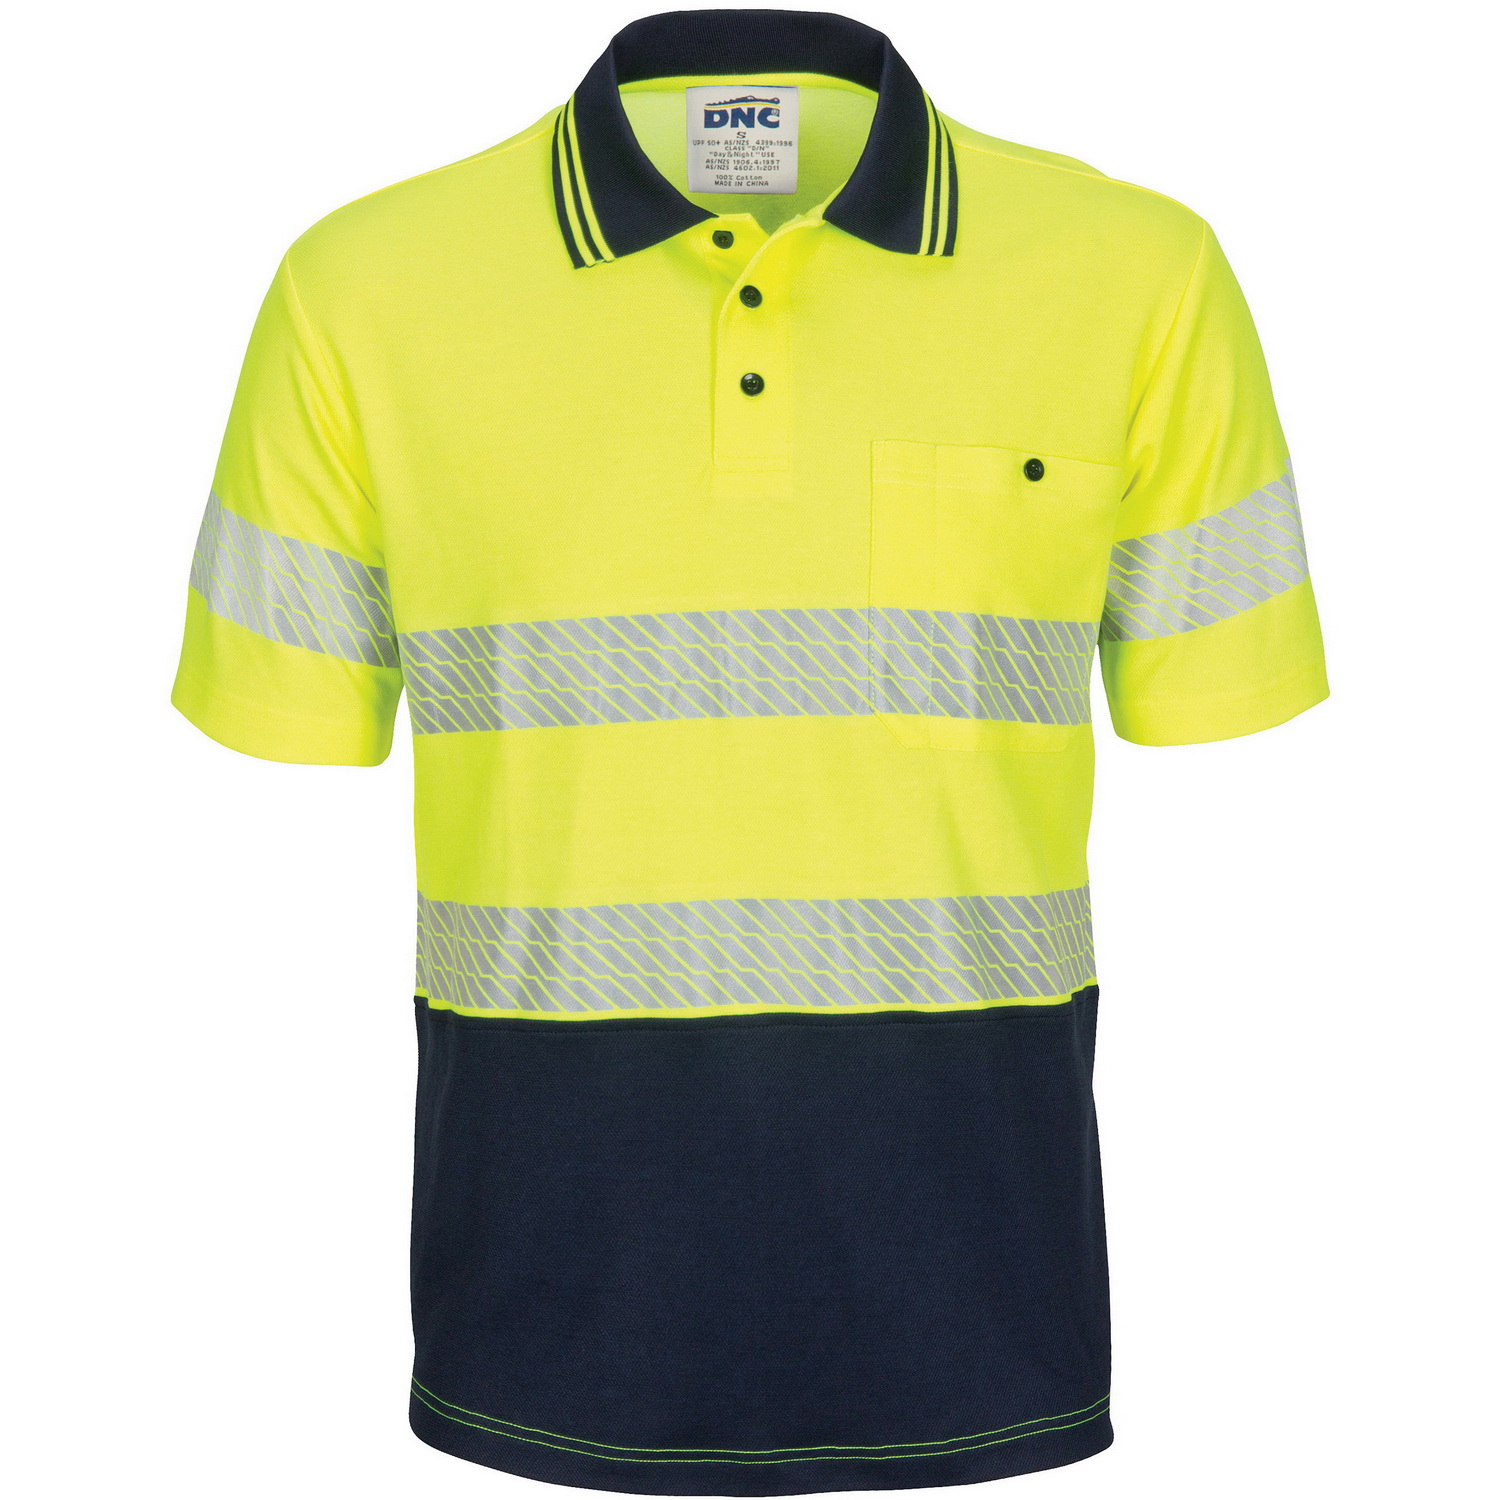 HIVIS Segment Taped Cotton Backed Polo - Short Sleeve